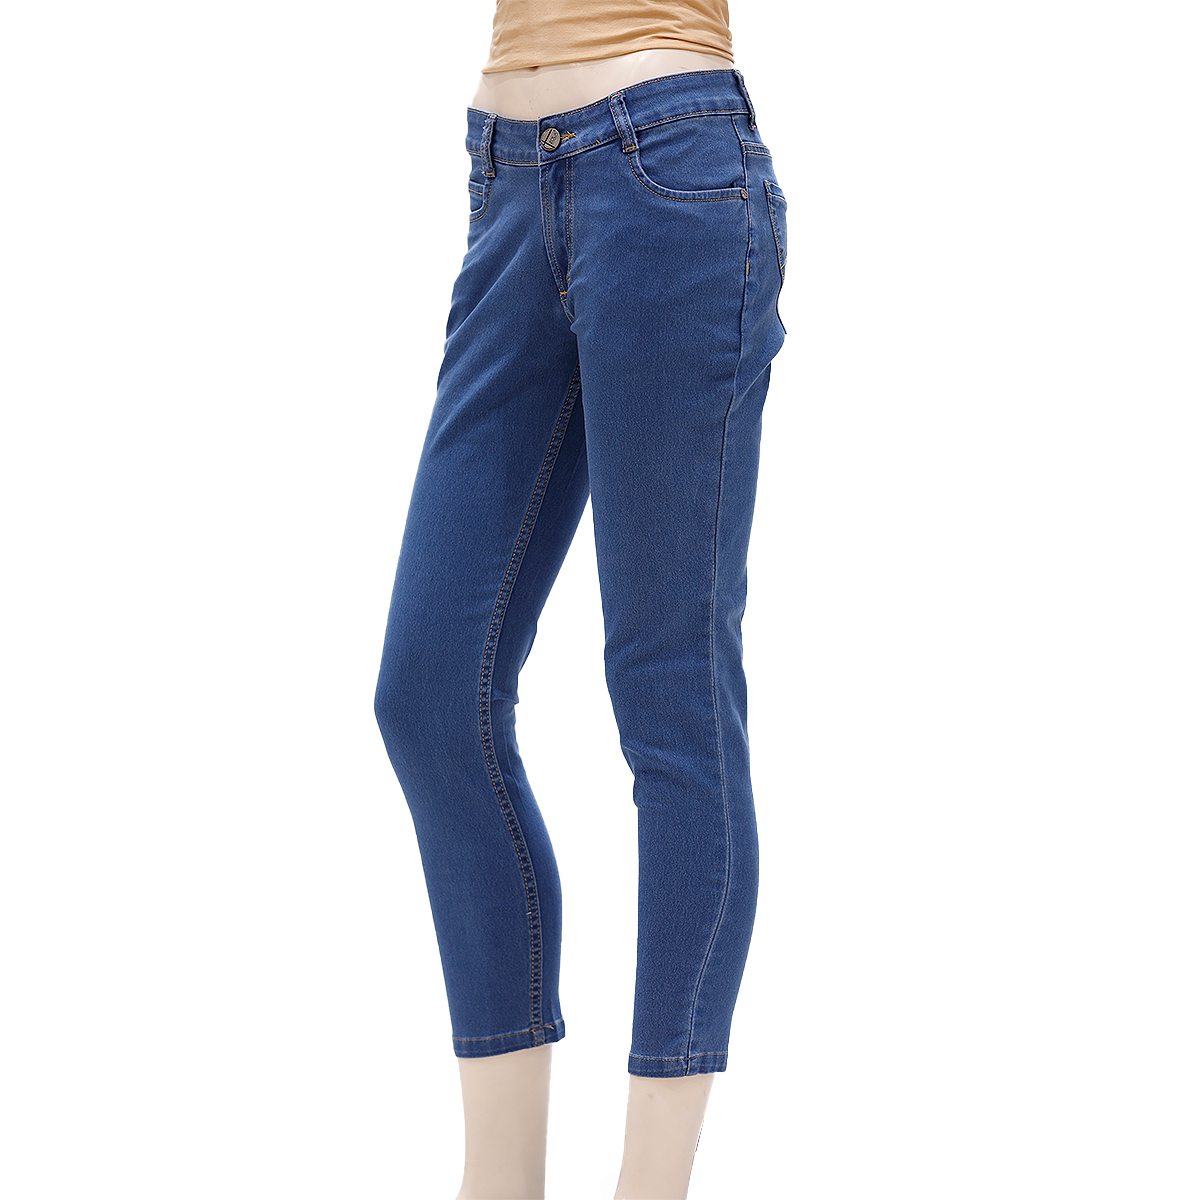 Zola Ankle Length Mid Waist Silky Finished Jeans With 1 Button Fly Front Zip Opening - Stone/Mid Blue, Size-32